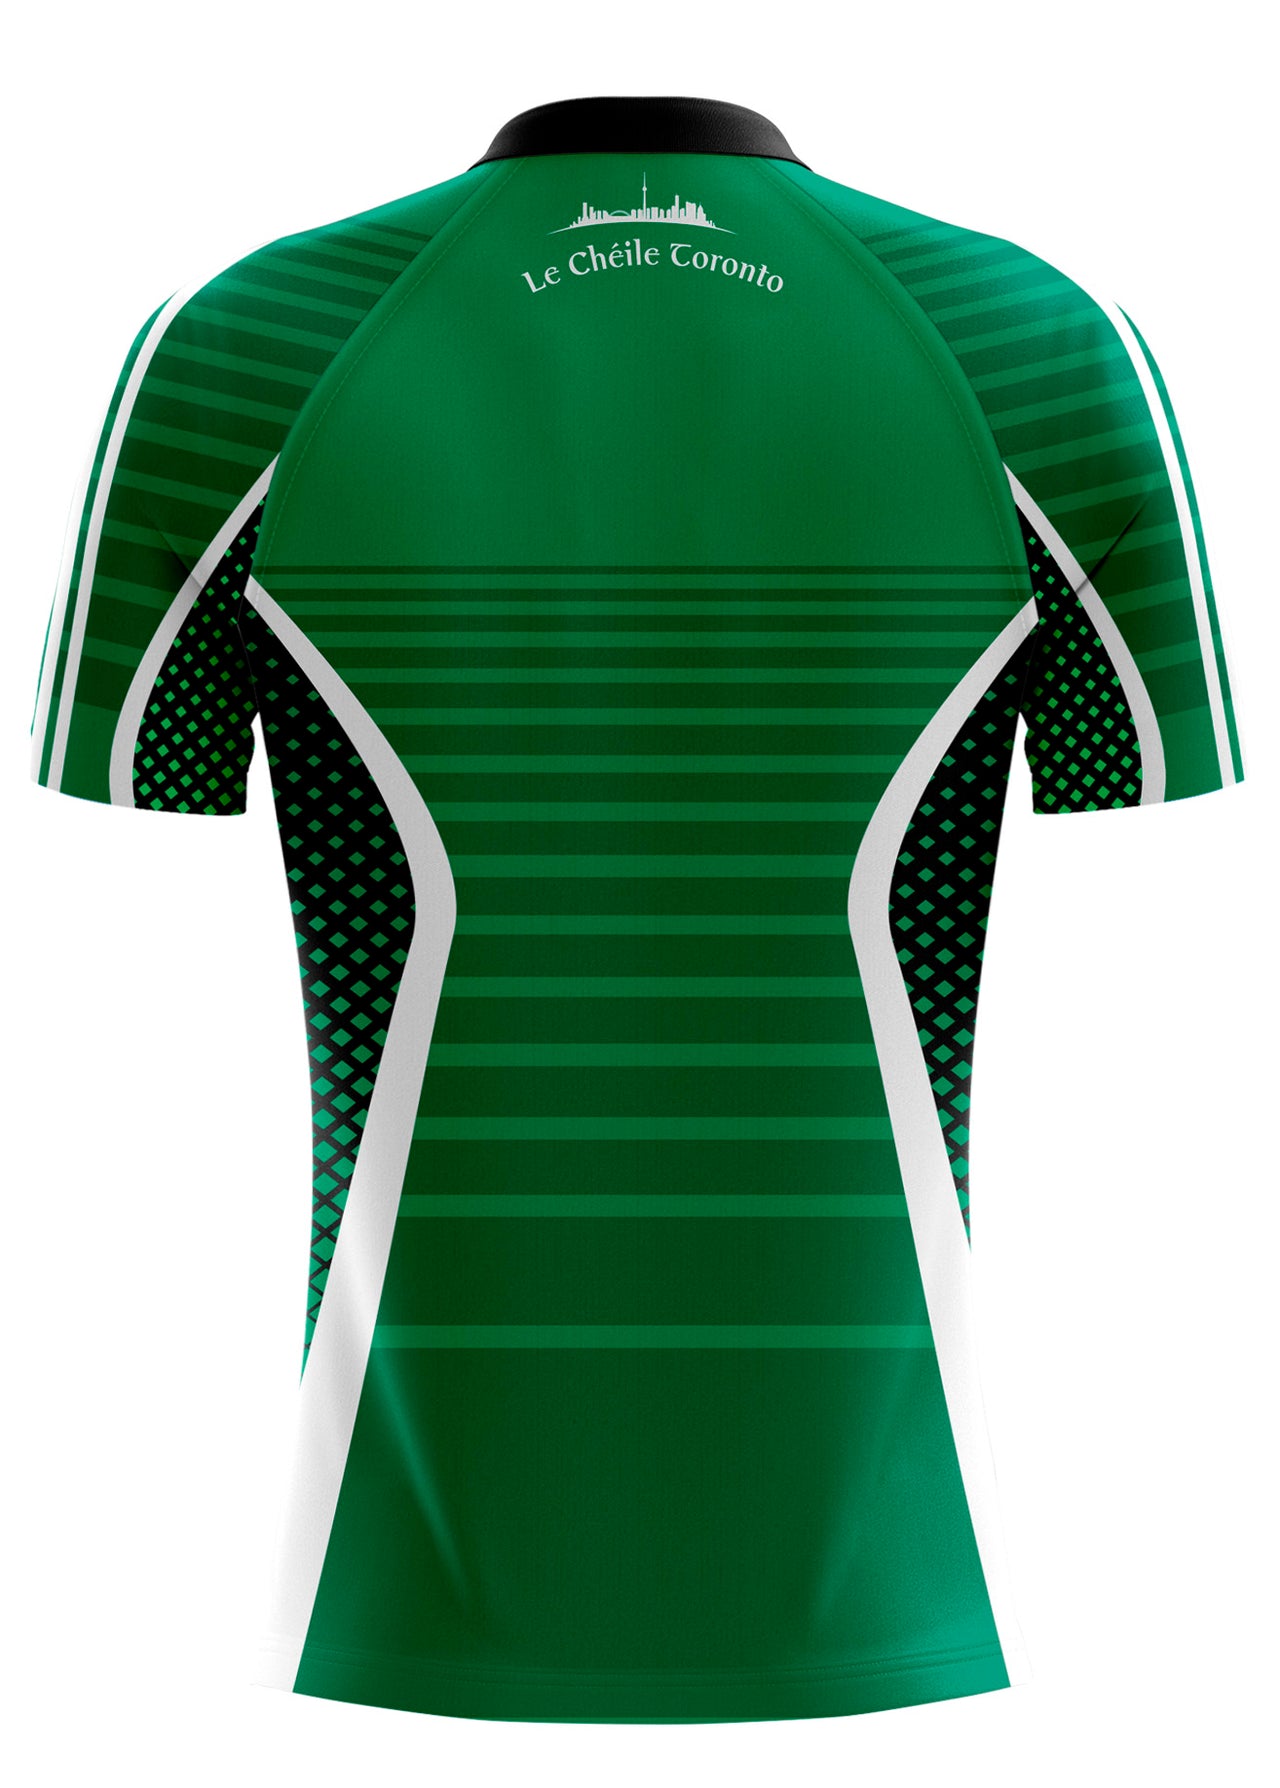 Le Cheile Camogie Home Jersey Kids